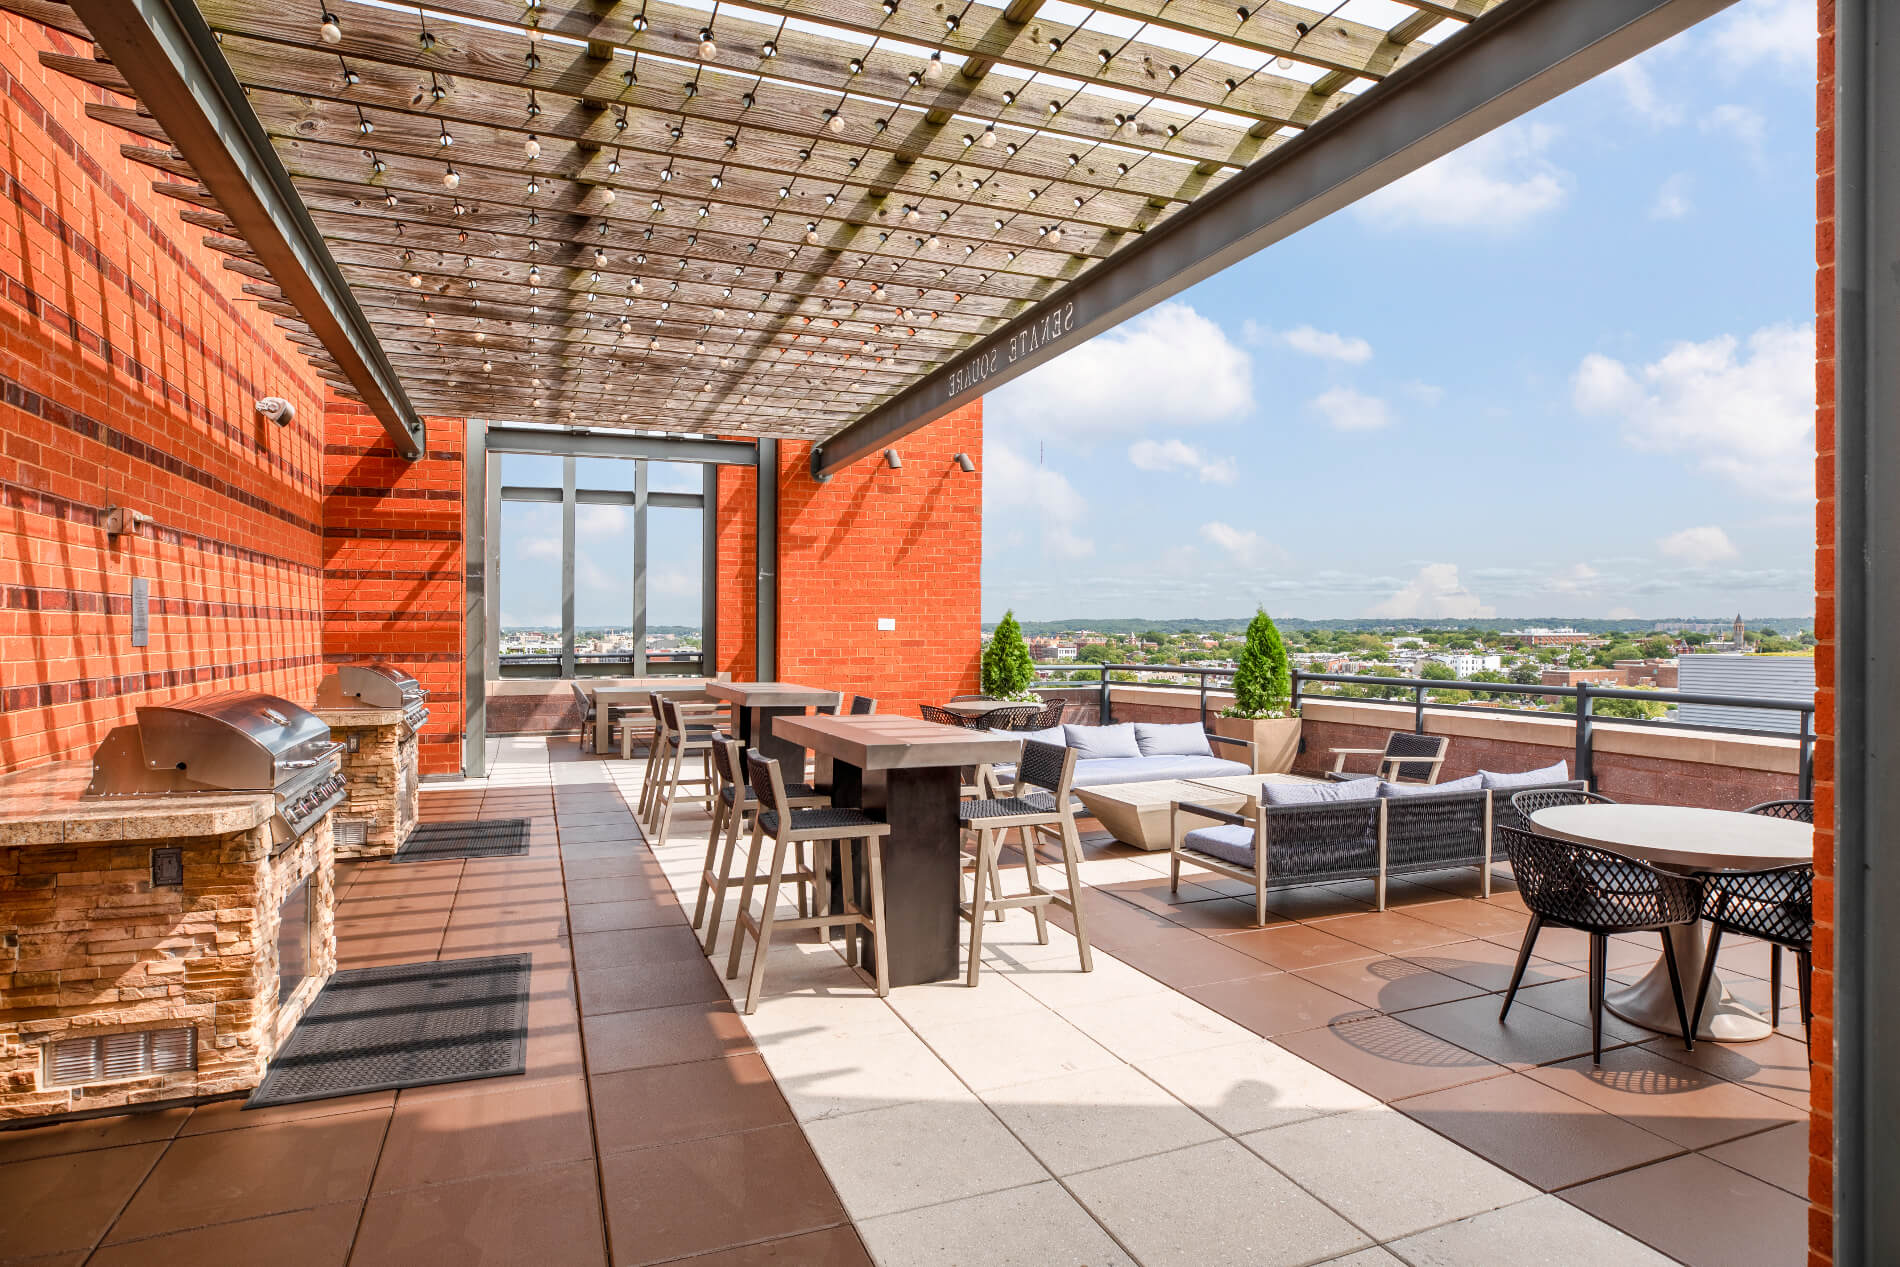 Grilling stations with a variety of tables and chairs overlooking the city